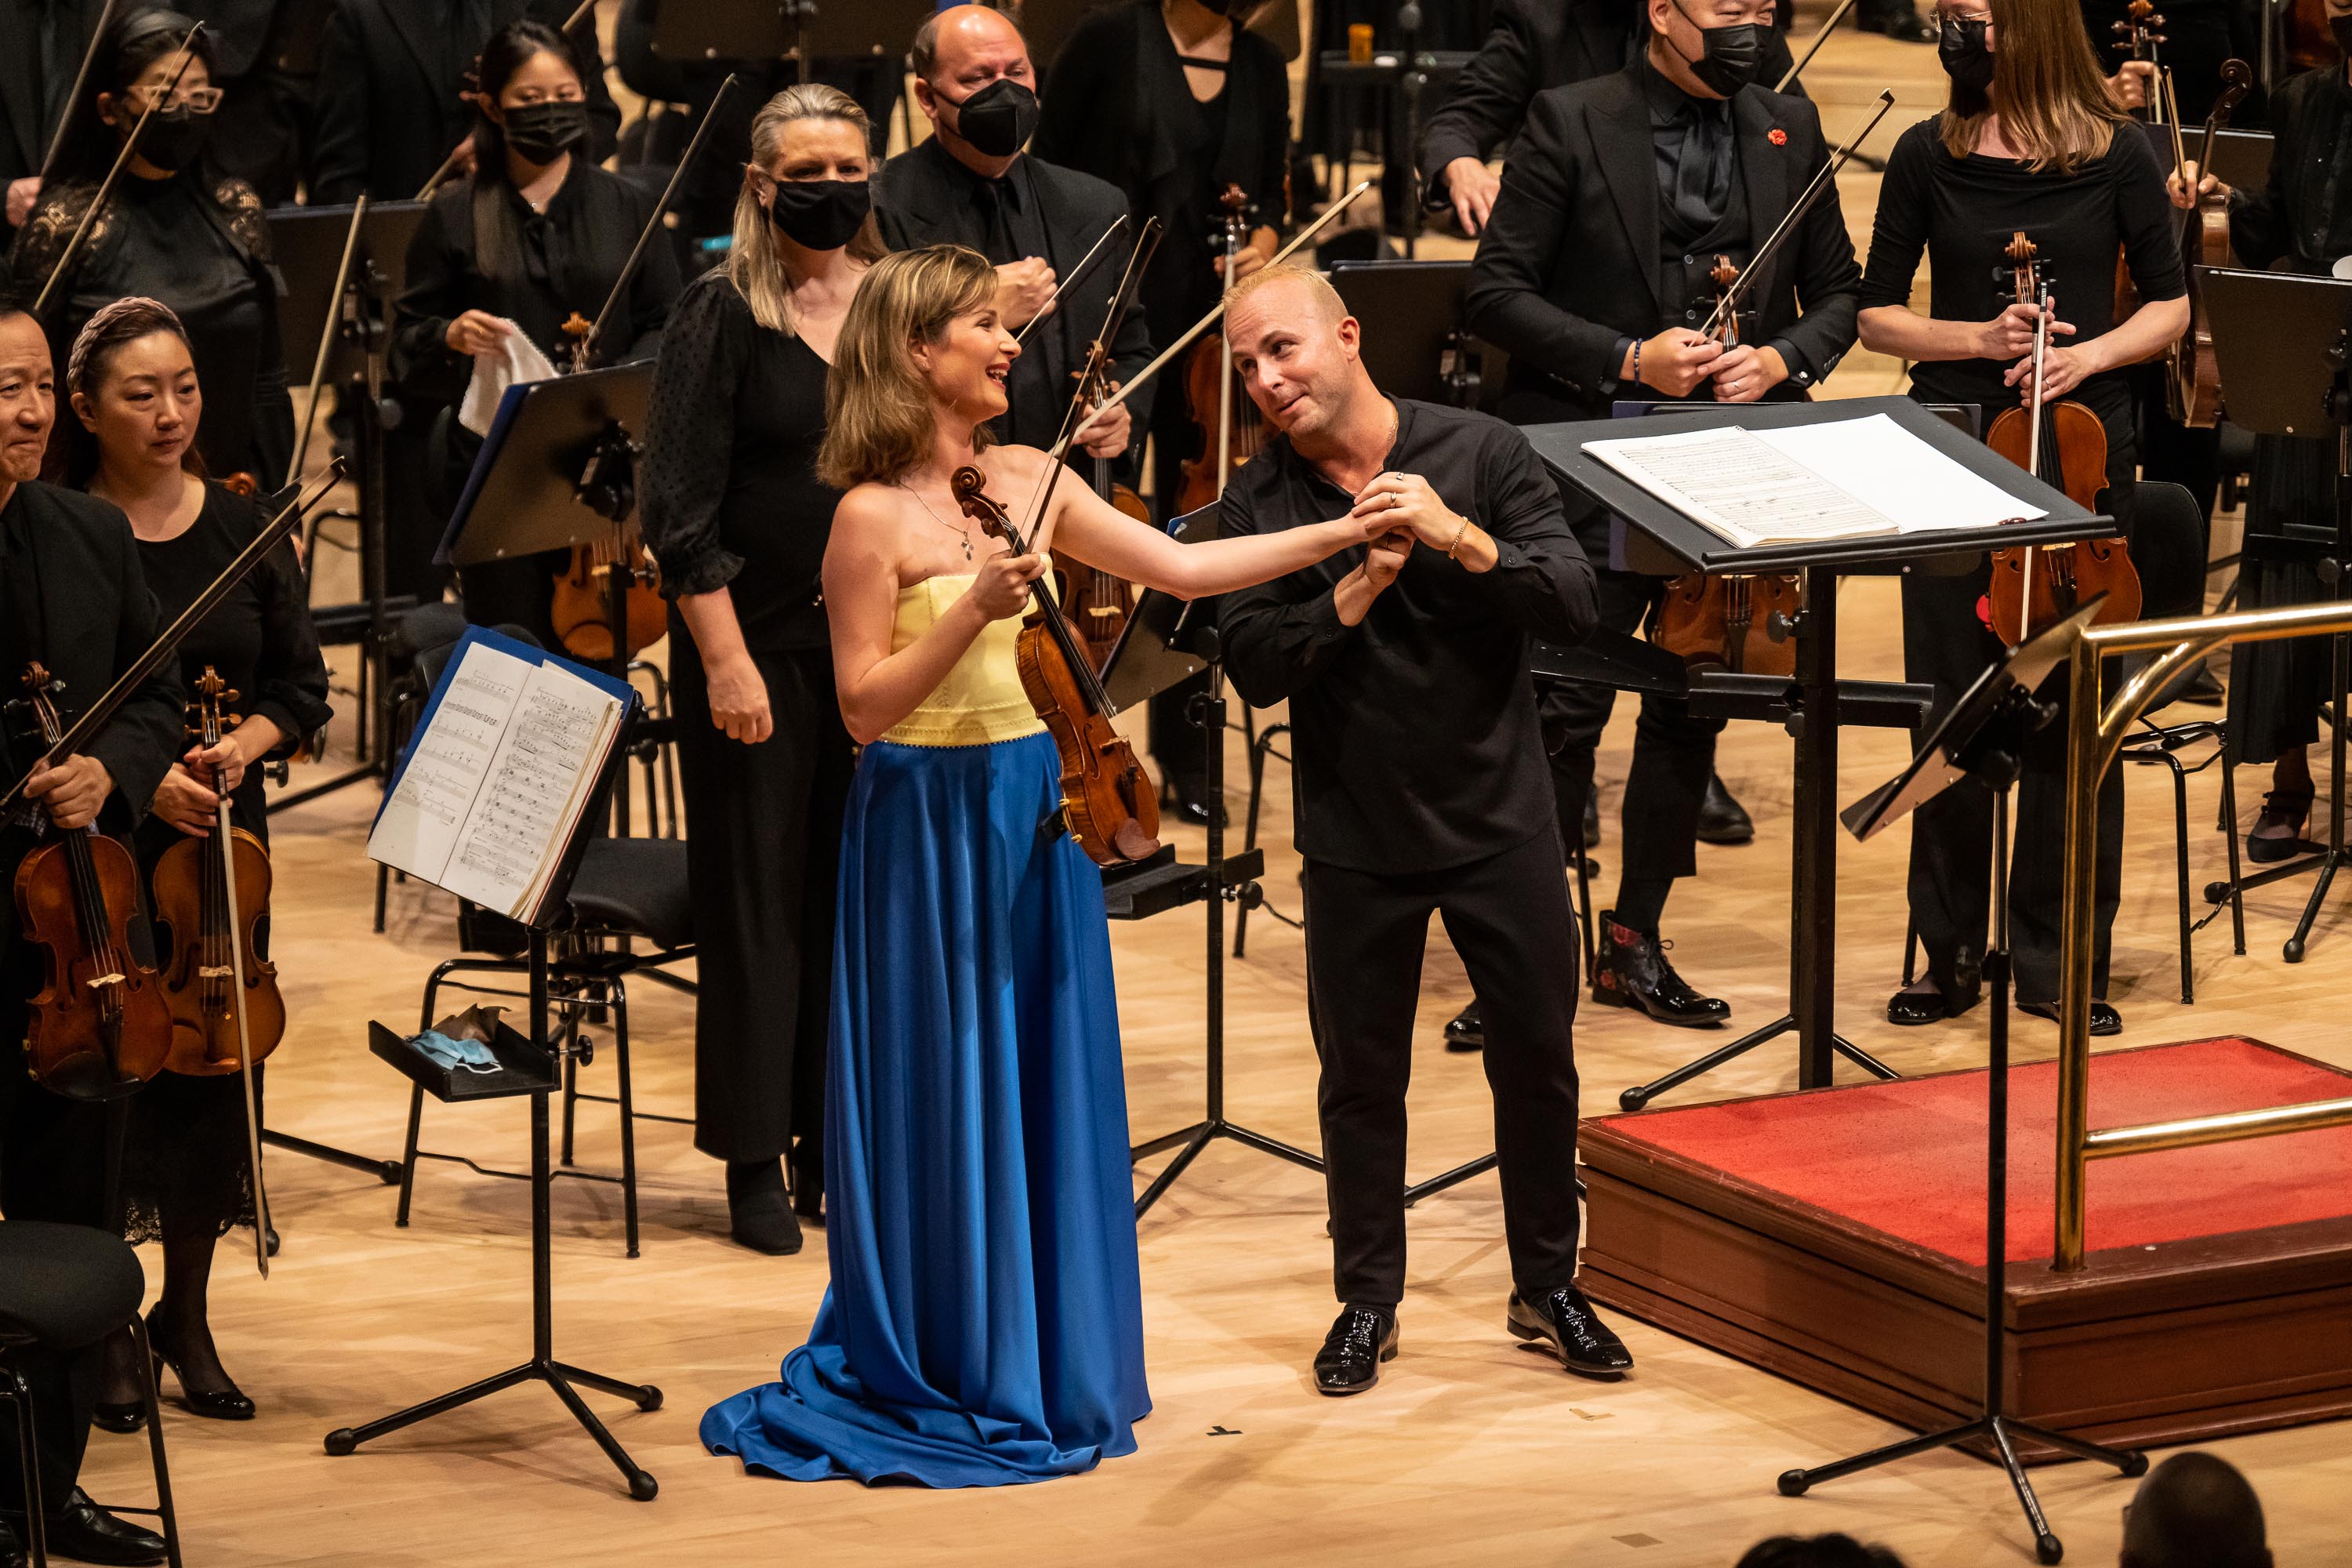 Lisa and Yannick playfully acknowledge the audience’s enthusiastic applause